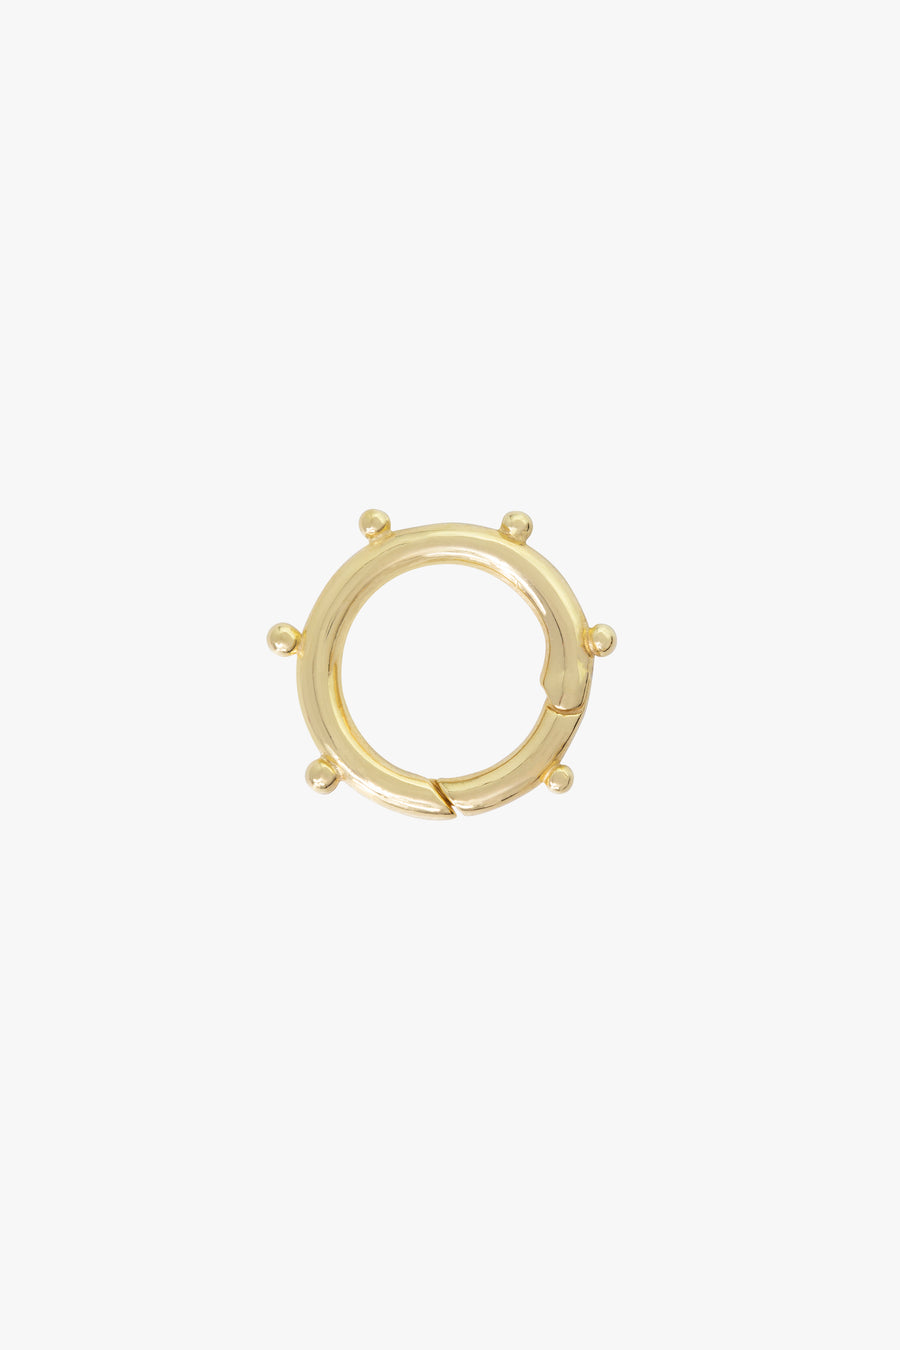 Sunny Clasp in Gold